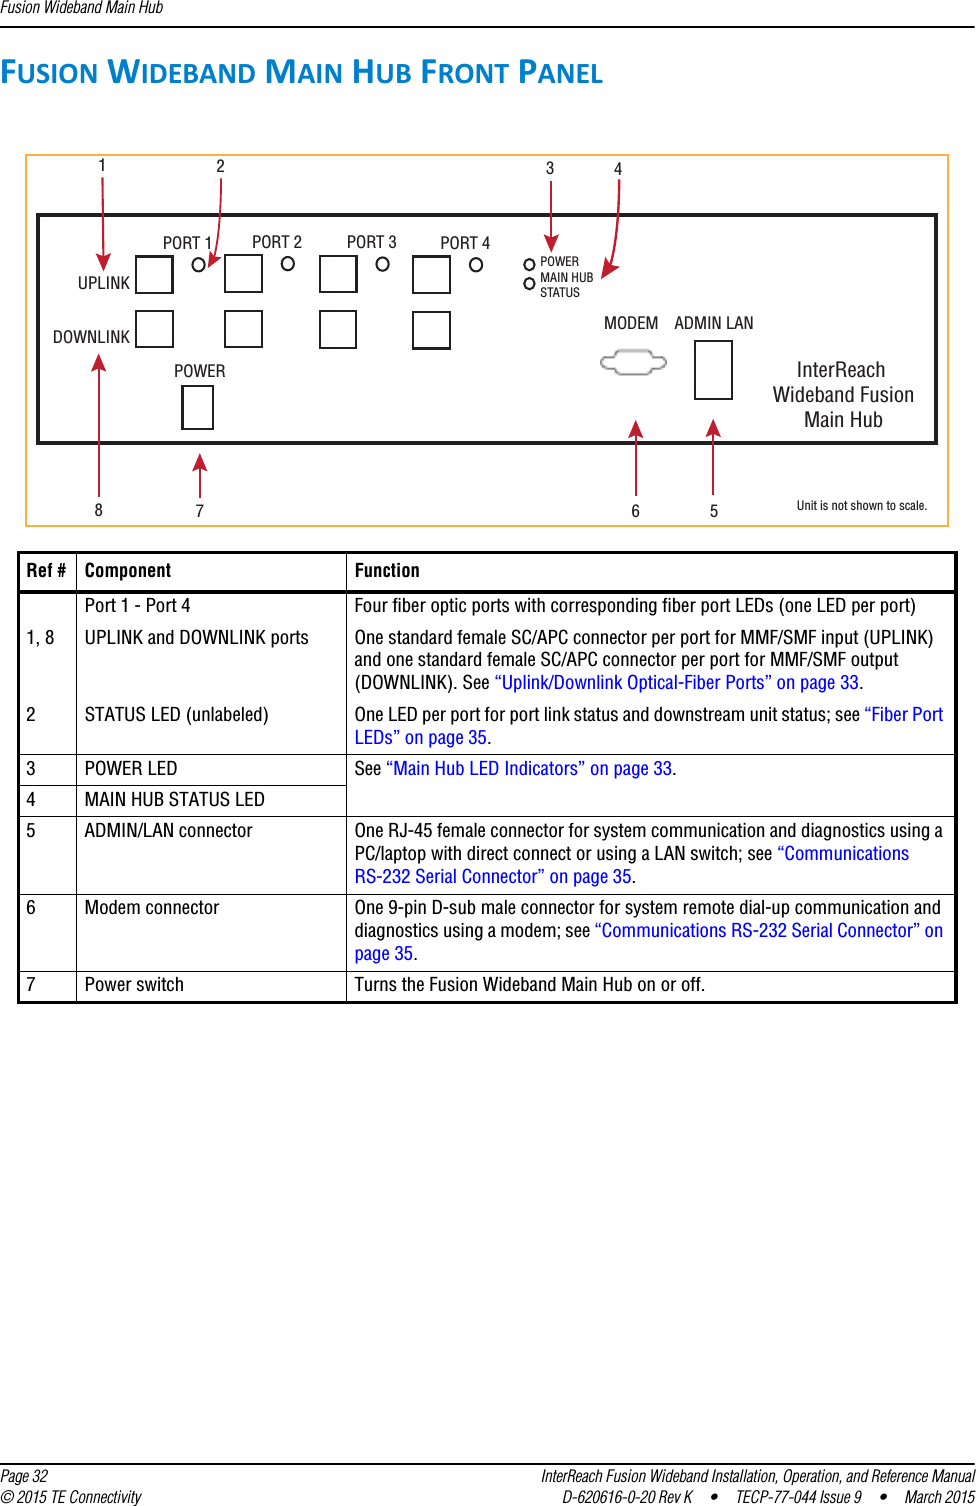 Fusion Wideband Main Hub  Page 32 InterReach Fusion Wideband Installation, Operation, and Reference Manual© 2015 TE Connectivity D-620616-0-20 Rev K  •  TECP-77-044 Issue 9  •  March 2015FUSION WIDEBAND MAIN HUB FRONT PANELRef # Component FunctionPort 1 - Port 4  Four fiber optic ports with corresponding fiber port LEDs (one LED per port)1, 8 UPLINK and DOWNLINK ports One standard female SC/APC connector per port for MMF/SMF input (UPLINK) and one standard female SC/APC connector per port for MMF/SMF output (DOWNLINK). See “Uplink/Downlink Optical-Fiber Ports” on page 33.2STATUS LED (unlabeled) One LED per port for port link status and downstream unit status; see “Fiber Port LEDs” on page 35.3POWER LED See “Main Hub LED Indicators” on page 33.4MAIN HUB STATUS LED5ADMIN/LAN connector One RJ-45 female connector for system communication and diagnostics using a PC/laptop with direct connect or using a LAN switch; see “Communications RS-232 Serial Connector” on page 35.6Modem connector One 9-pin D-sub male connector for system remote dial-up communication and diagnostics using a modem; see “Communications RS-232 Serial Connector” on page 35.7Power switch Turns the Fusion Wideband Main Hub on or off.POWERMAIN HUBSTATUSUPLINKDOWNLINKPORT 1 PORT 2 PORT 3 PORT 4POWER InterReach Wideband FusionMain HubADMIN LANMODEM13567 Unit is not shown to scale.248